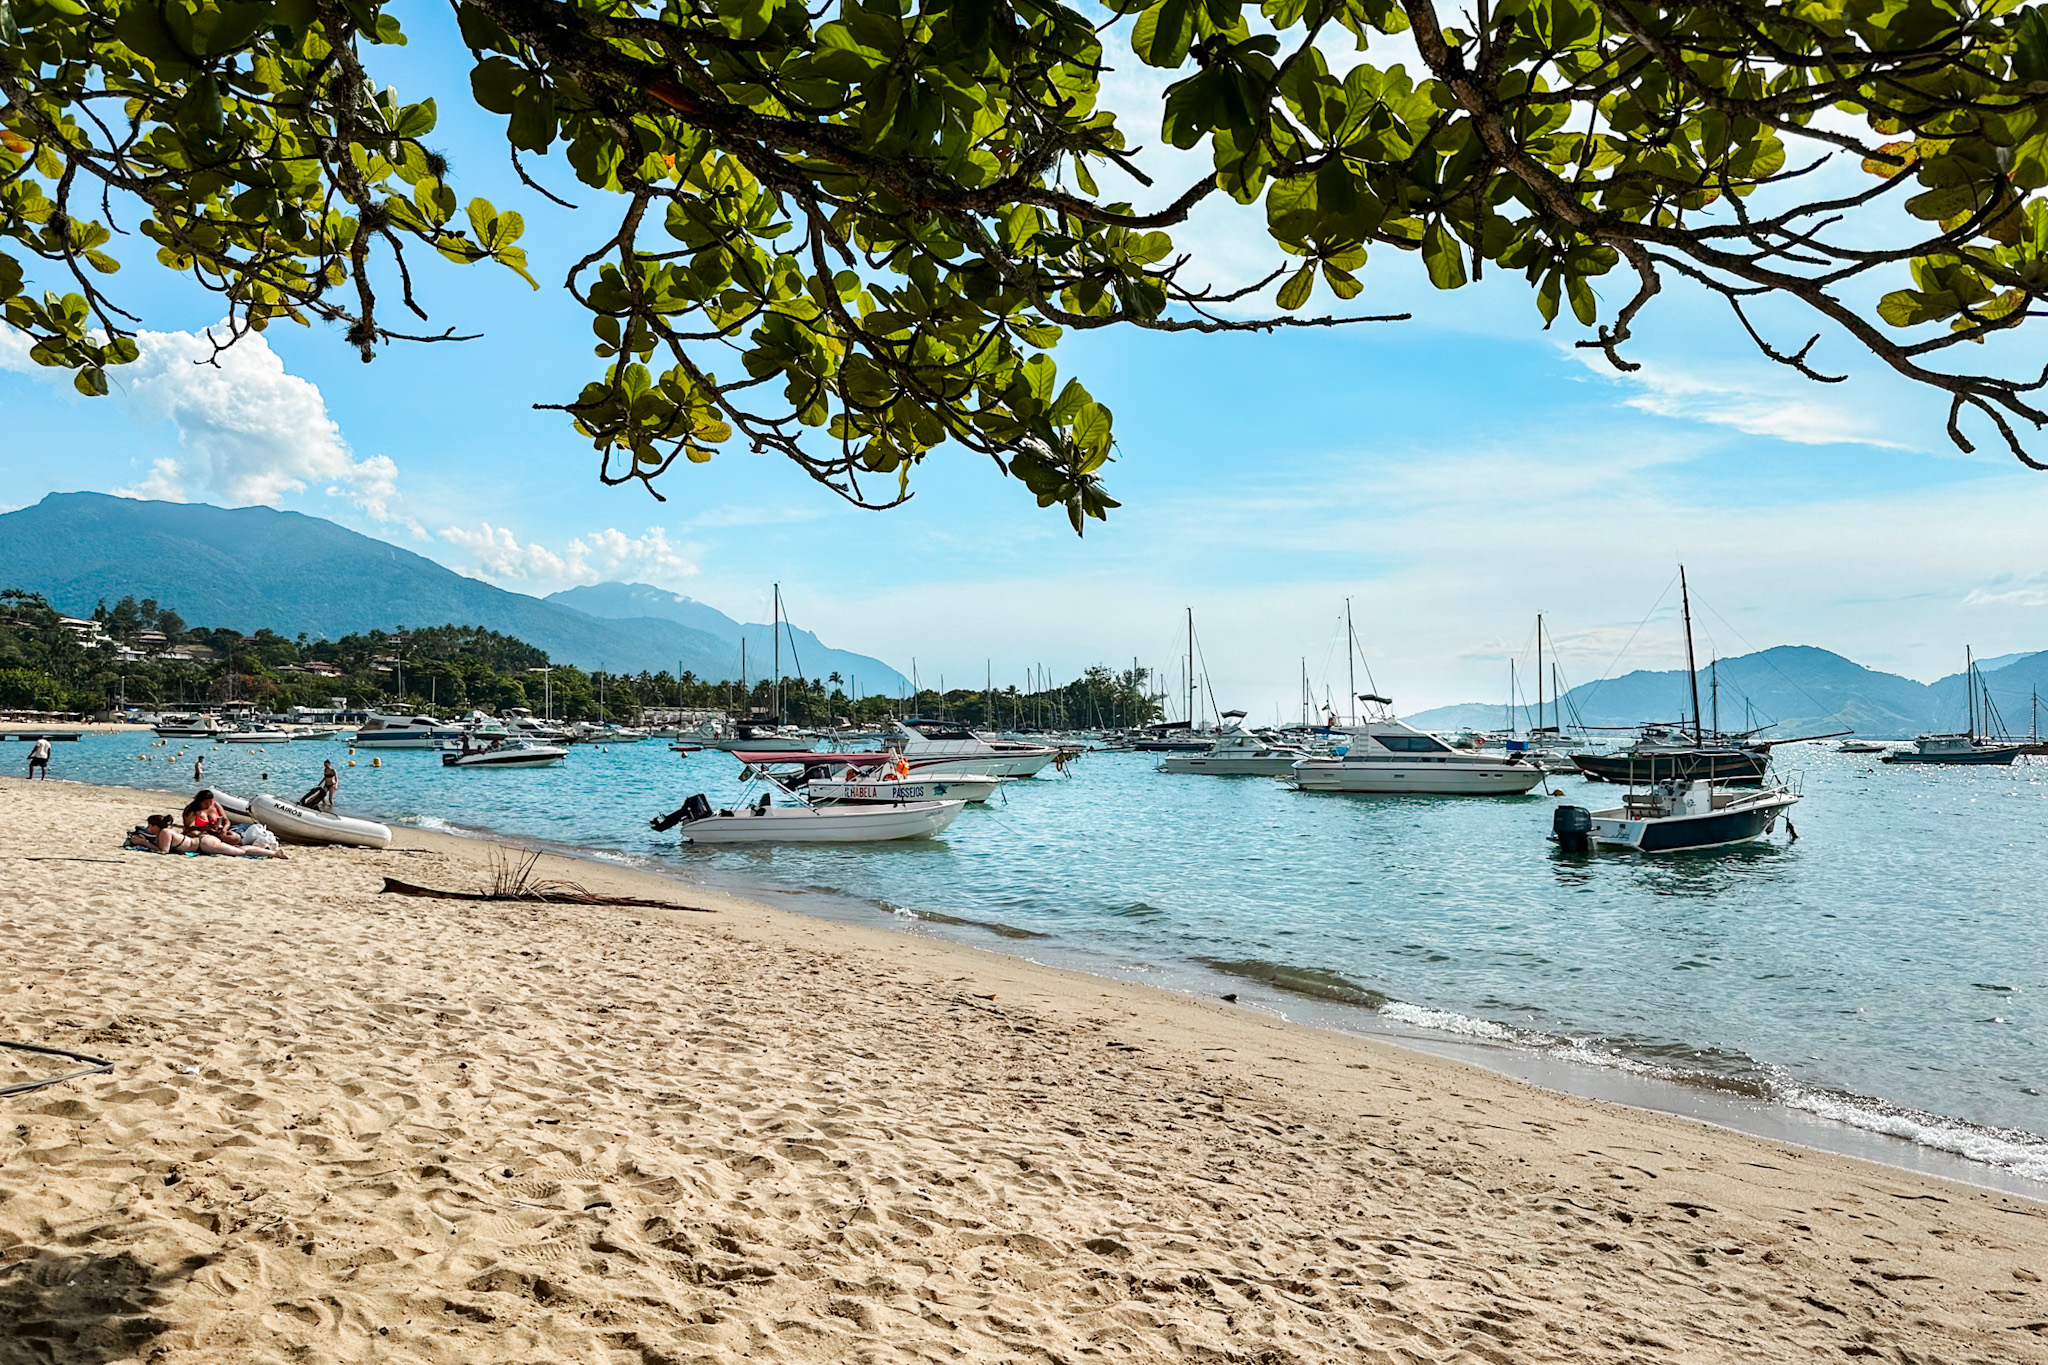 Ilhabela Travel Guide: Views over the beach with sail boats